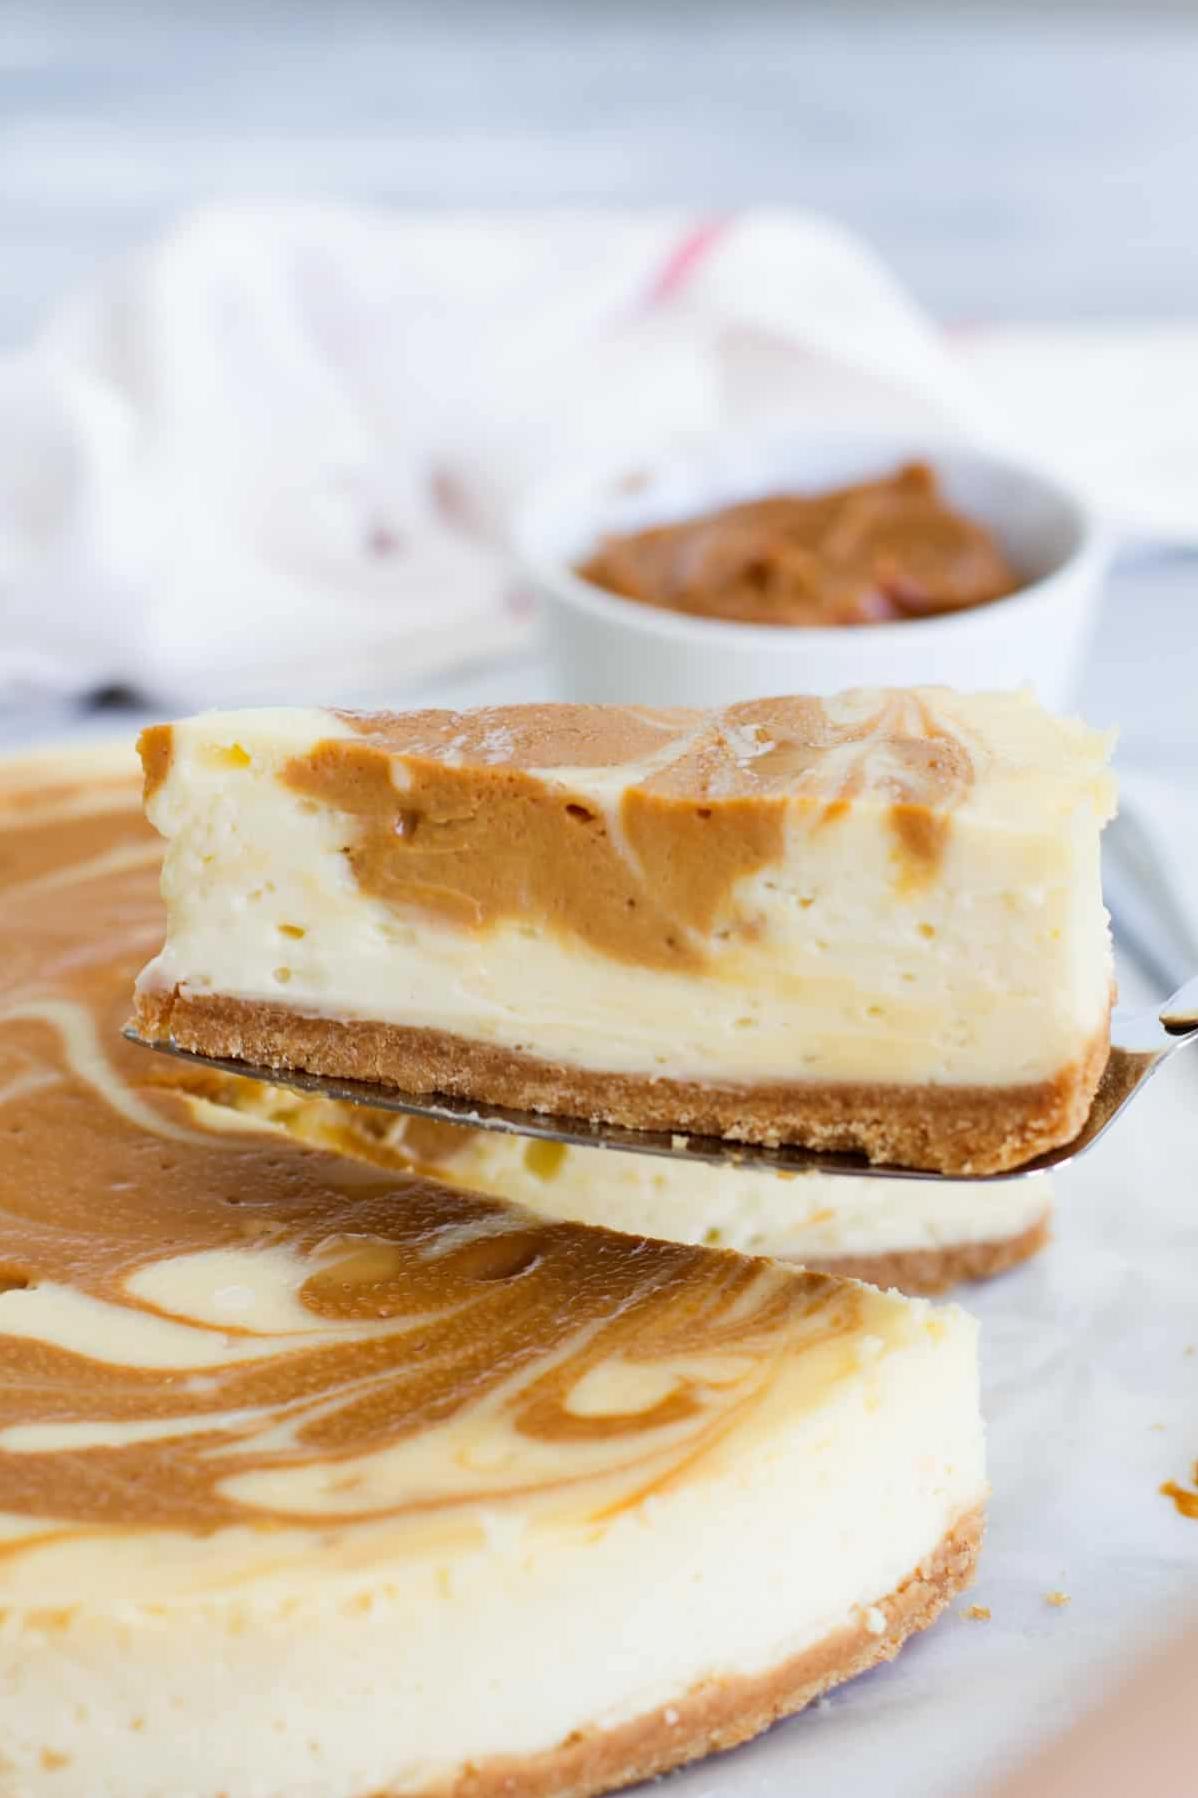  Cheesecake lovers rejoice! Here's a flavor twist you don't want to miss